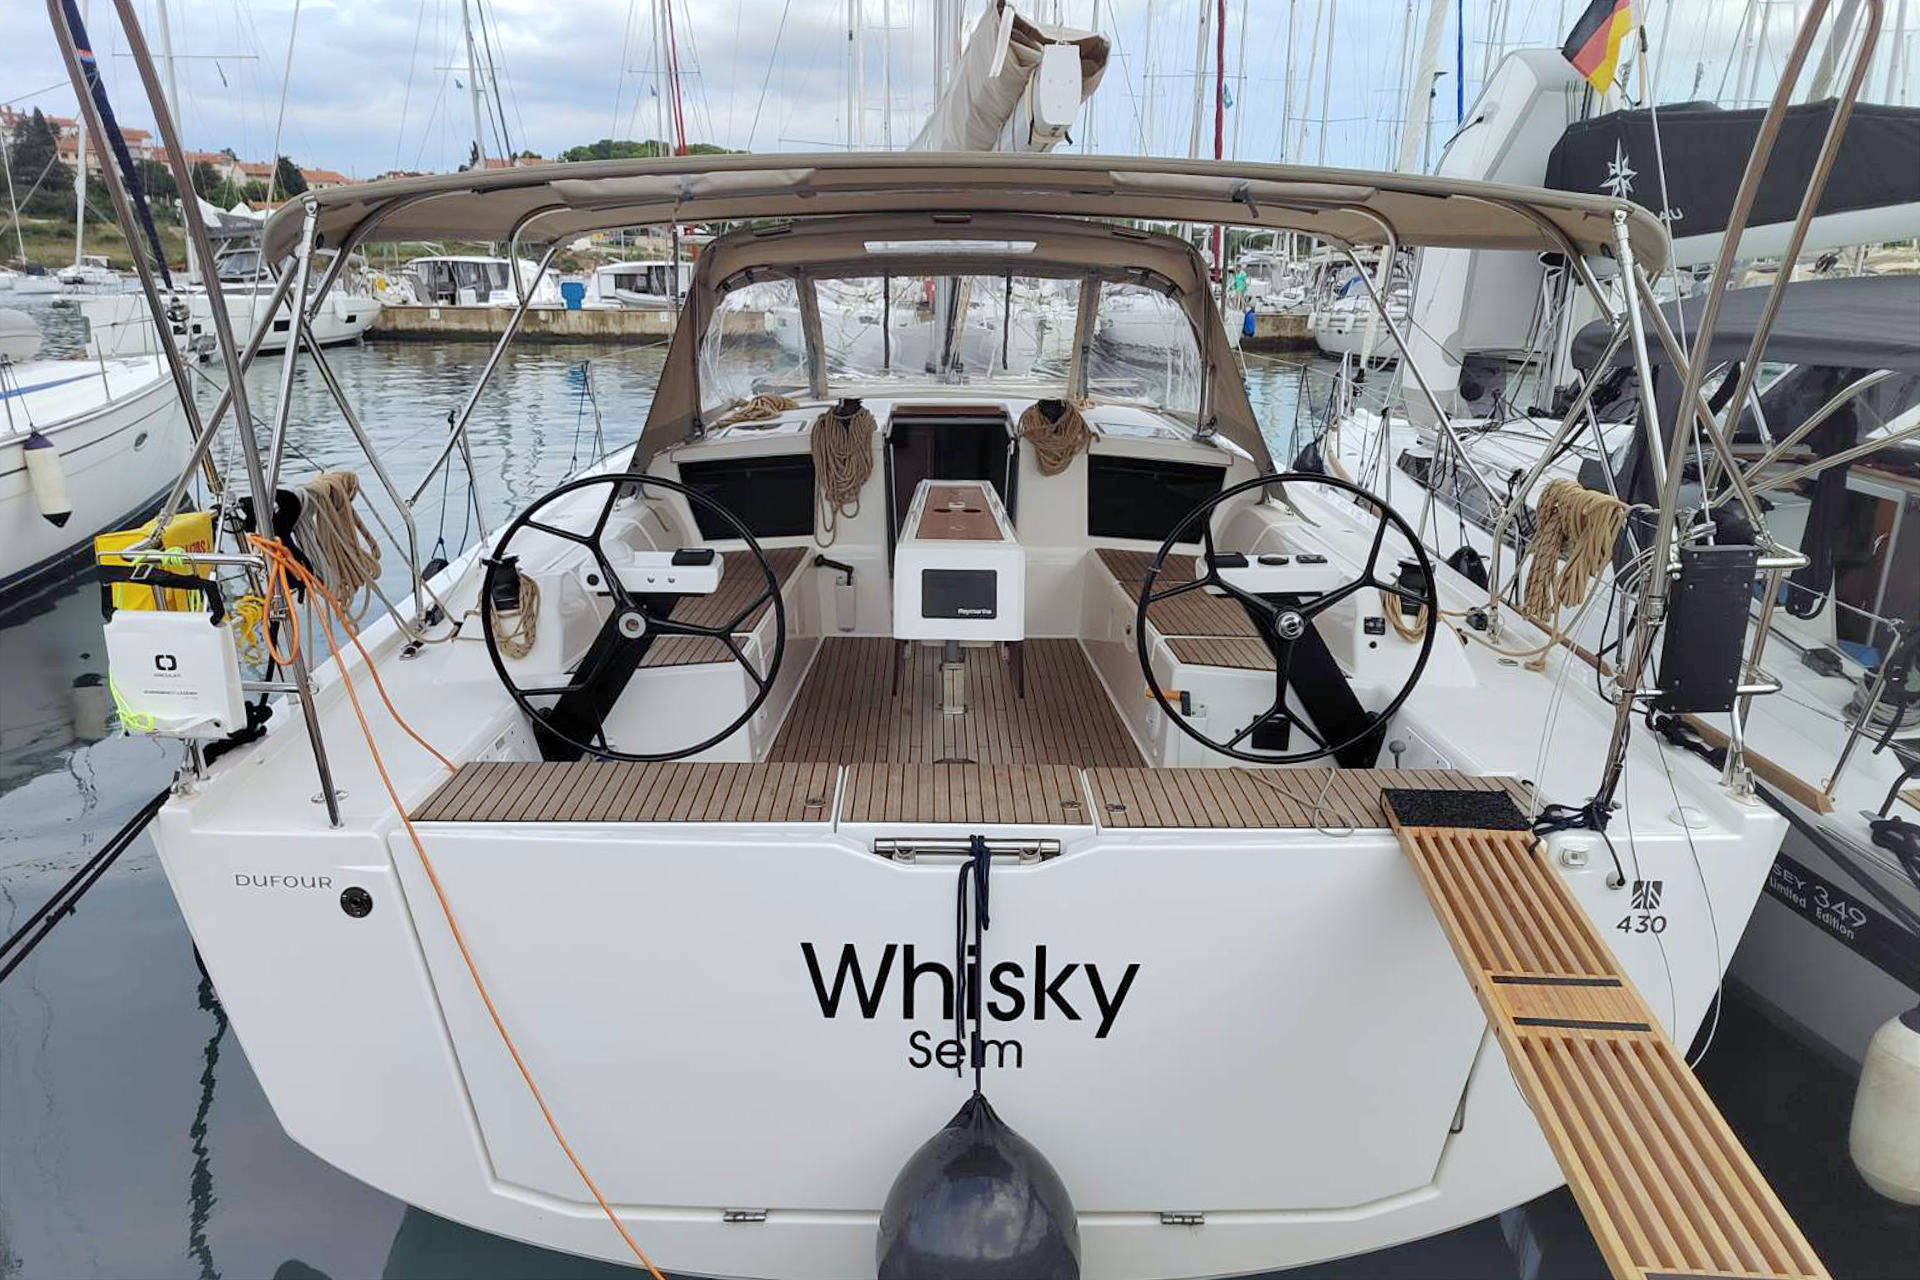 Dufour 430 – Whisky